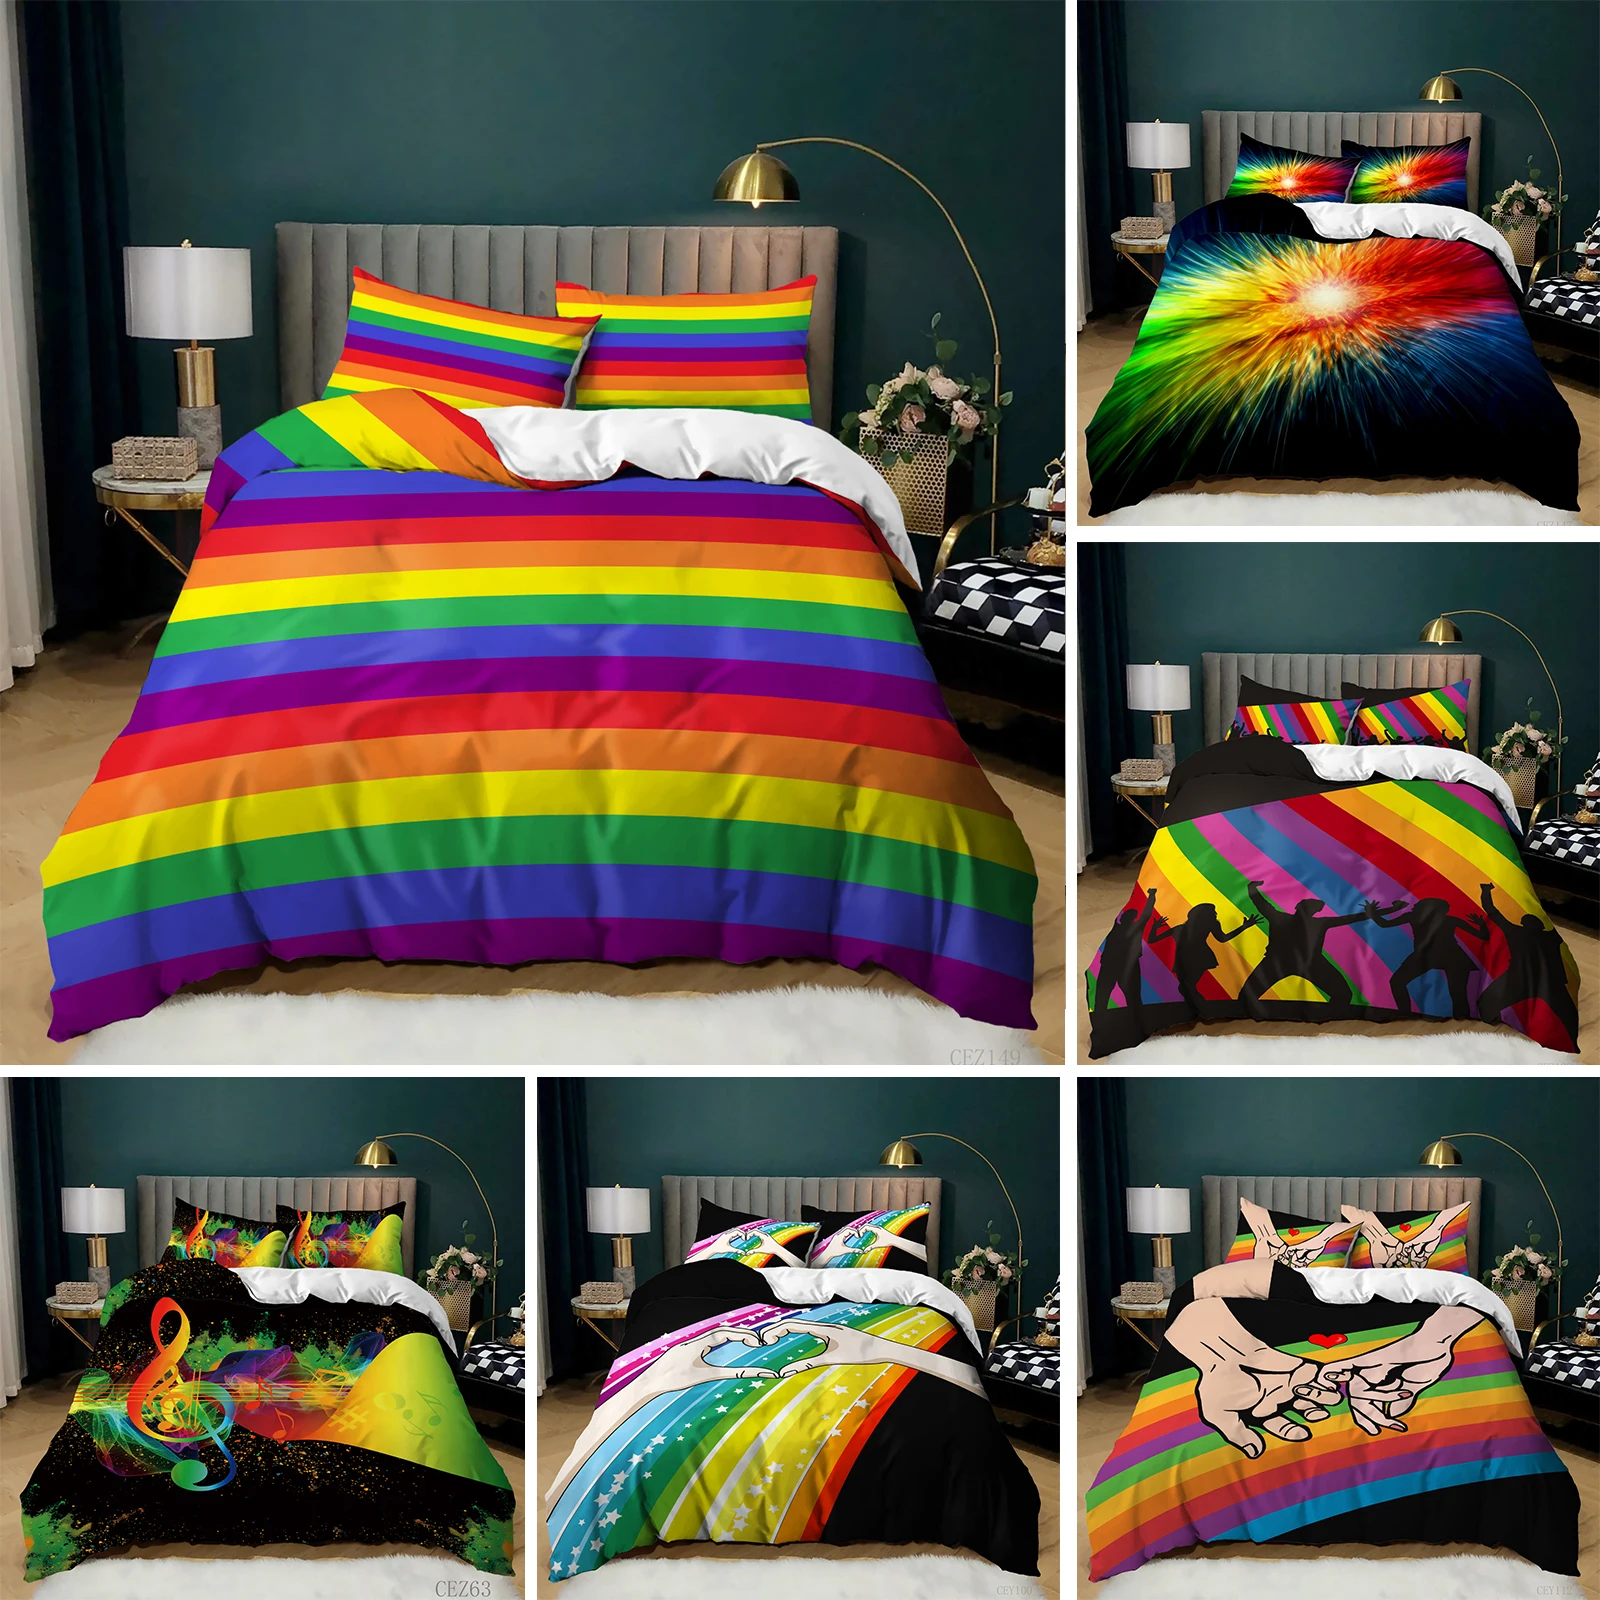 

Rainbow Duvet Cover King/Queen Size LGBT Abstract Rainbow Heart Bedding Set for Girls Women Colorful Lines Soft Quilt Cover